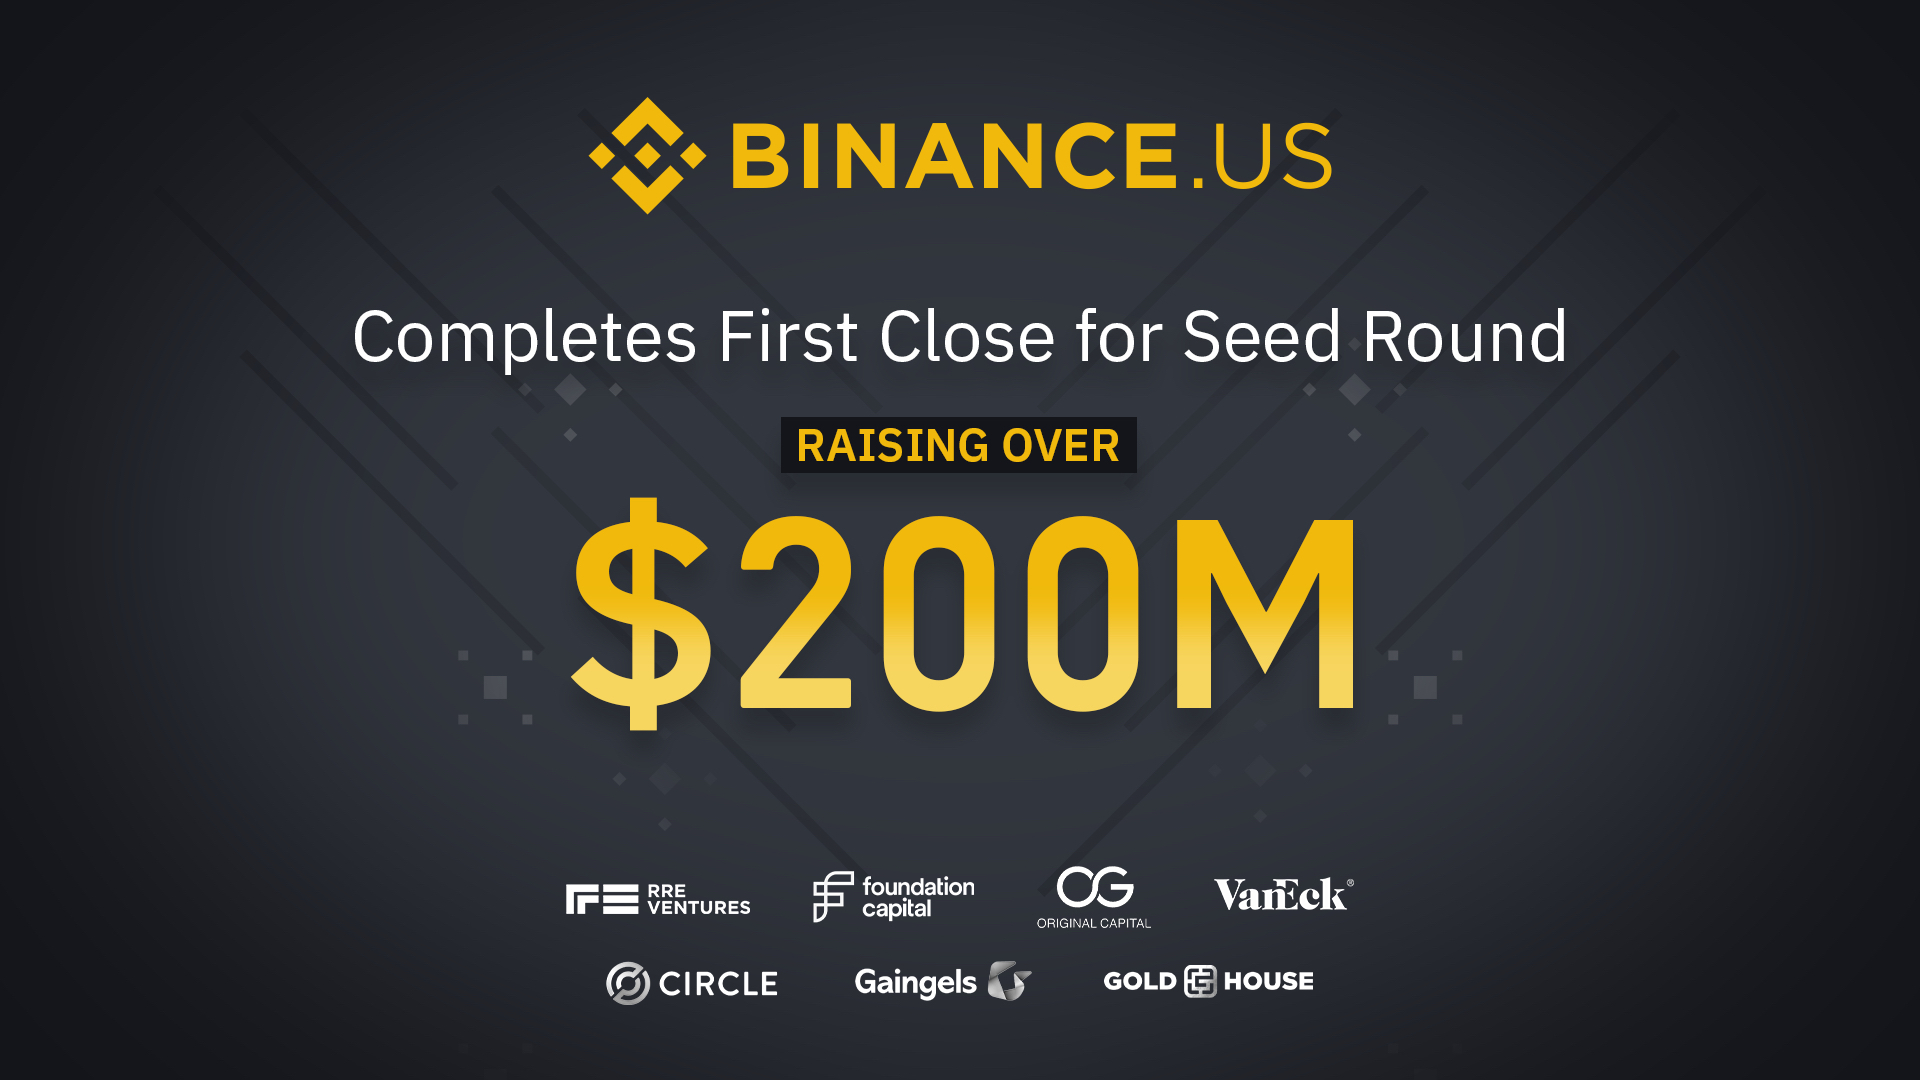 Binance.US Raises $200M+ in Seed Round at a $4.5B Valuation